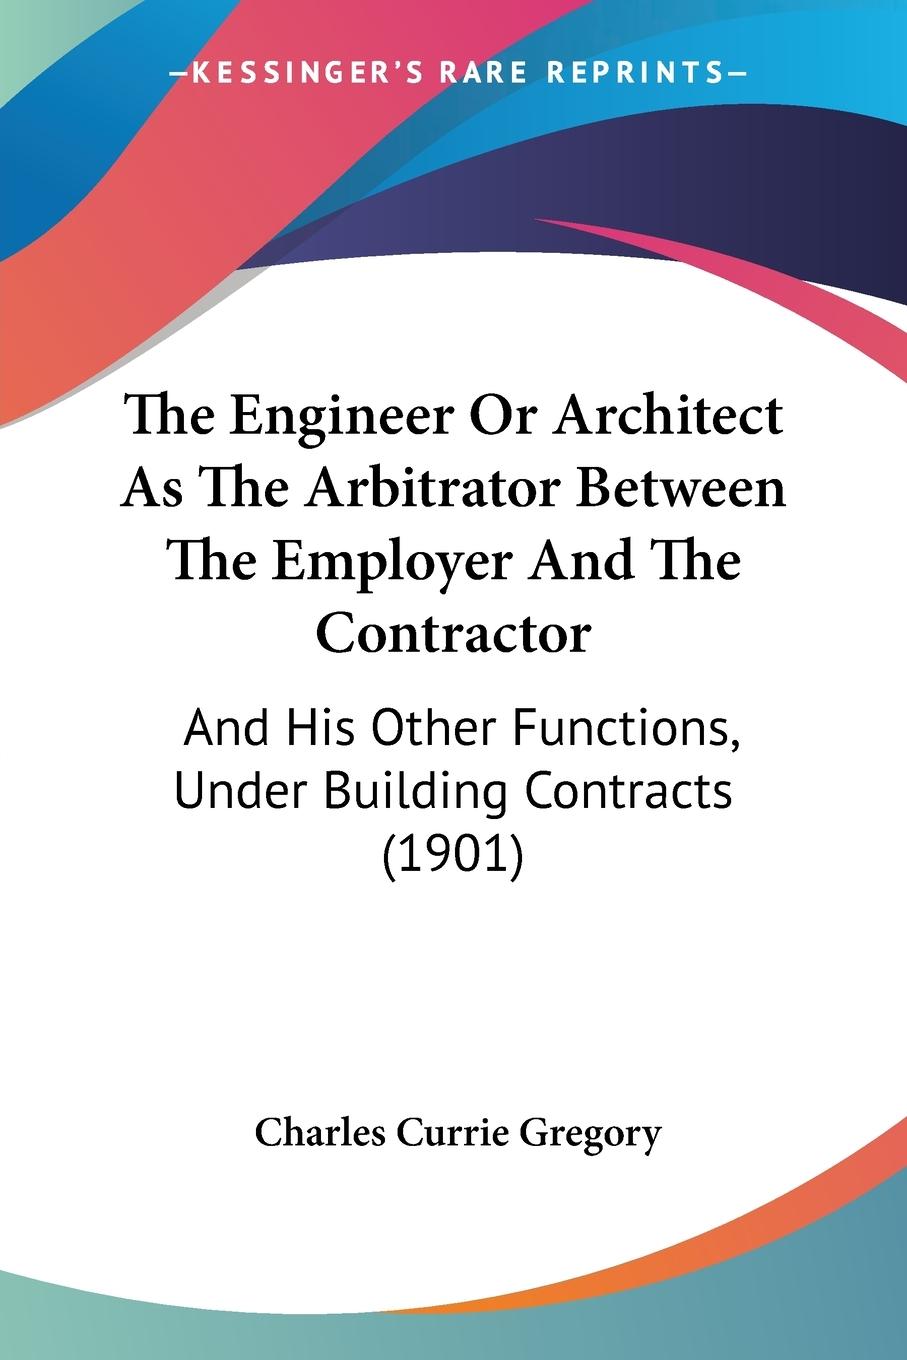 The Engineer Or Architect As The Arbitrator Between The Employer And The Contractor - Gregory, Charles Currie